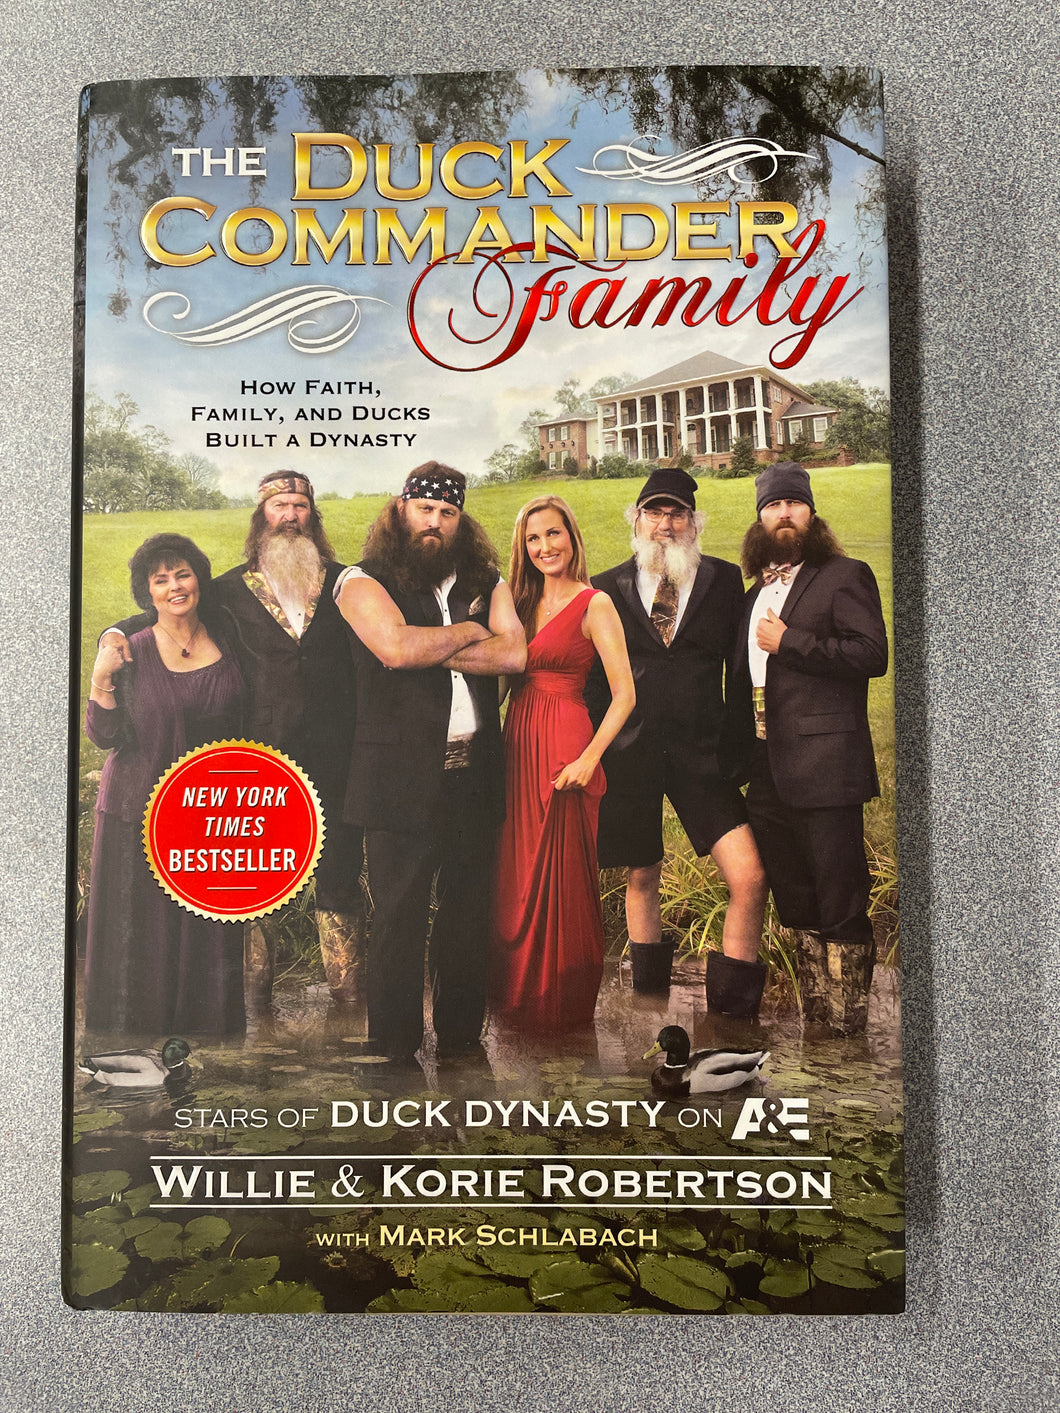 The Duck Commander Family: How Faith, Family, and Ducks Built a Dynasty, Robertson, Willie and Korie Robertson [2012] TS 3/24